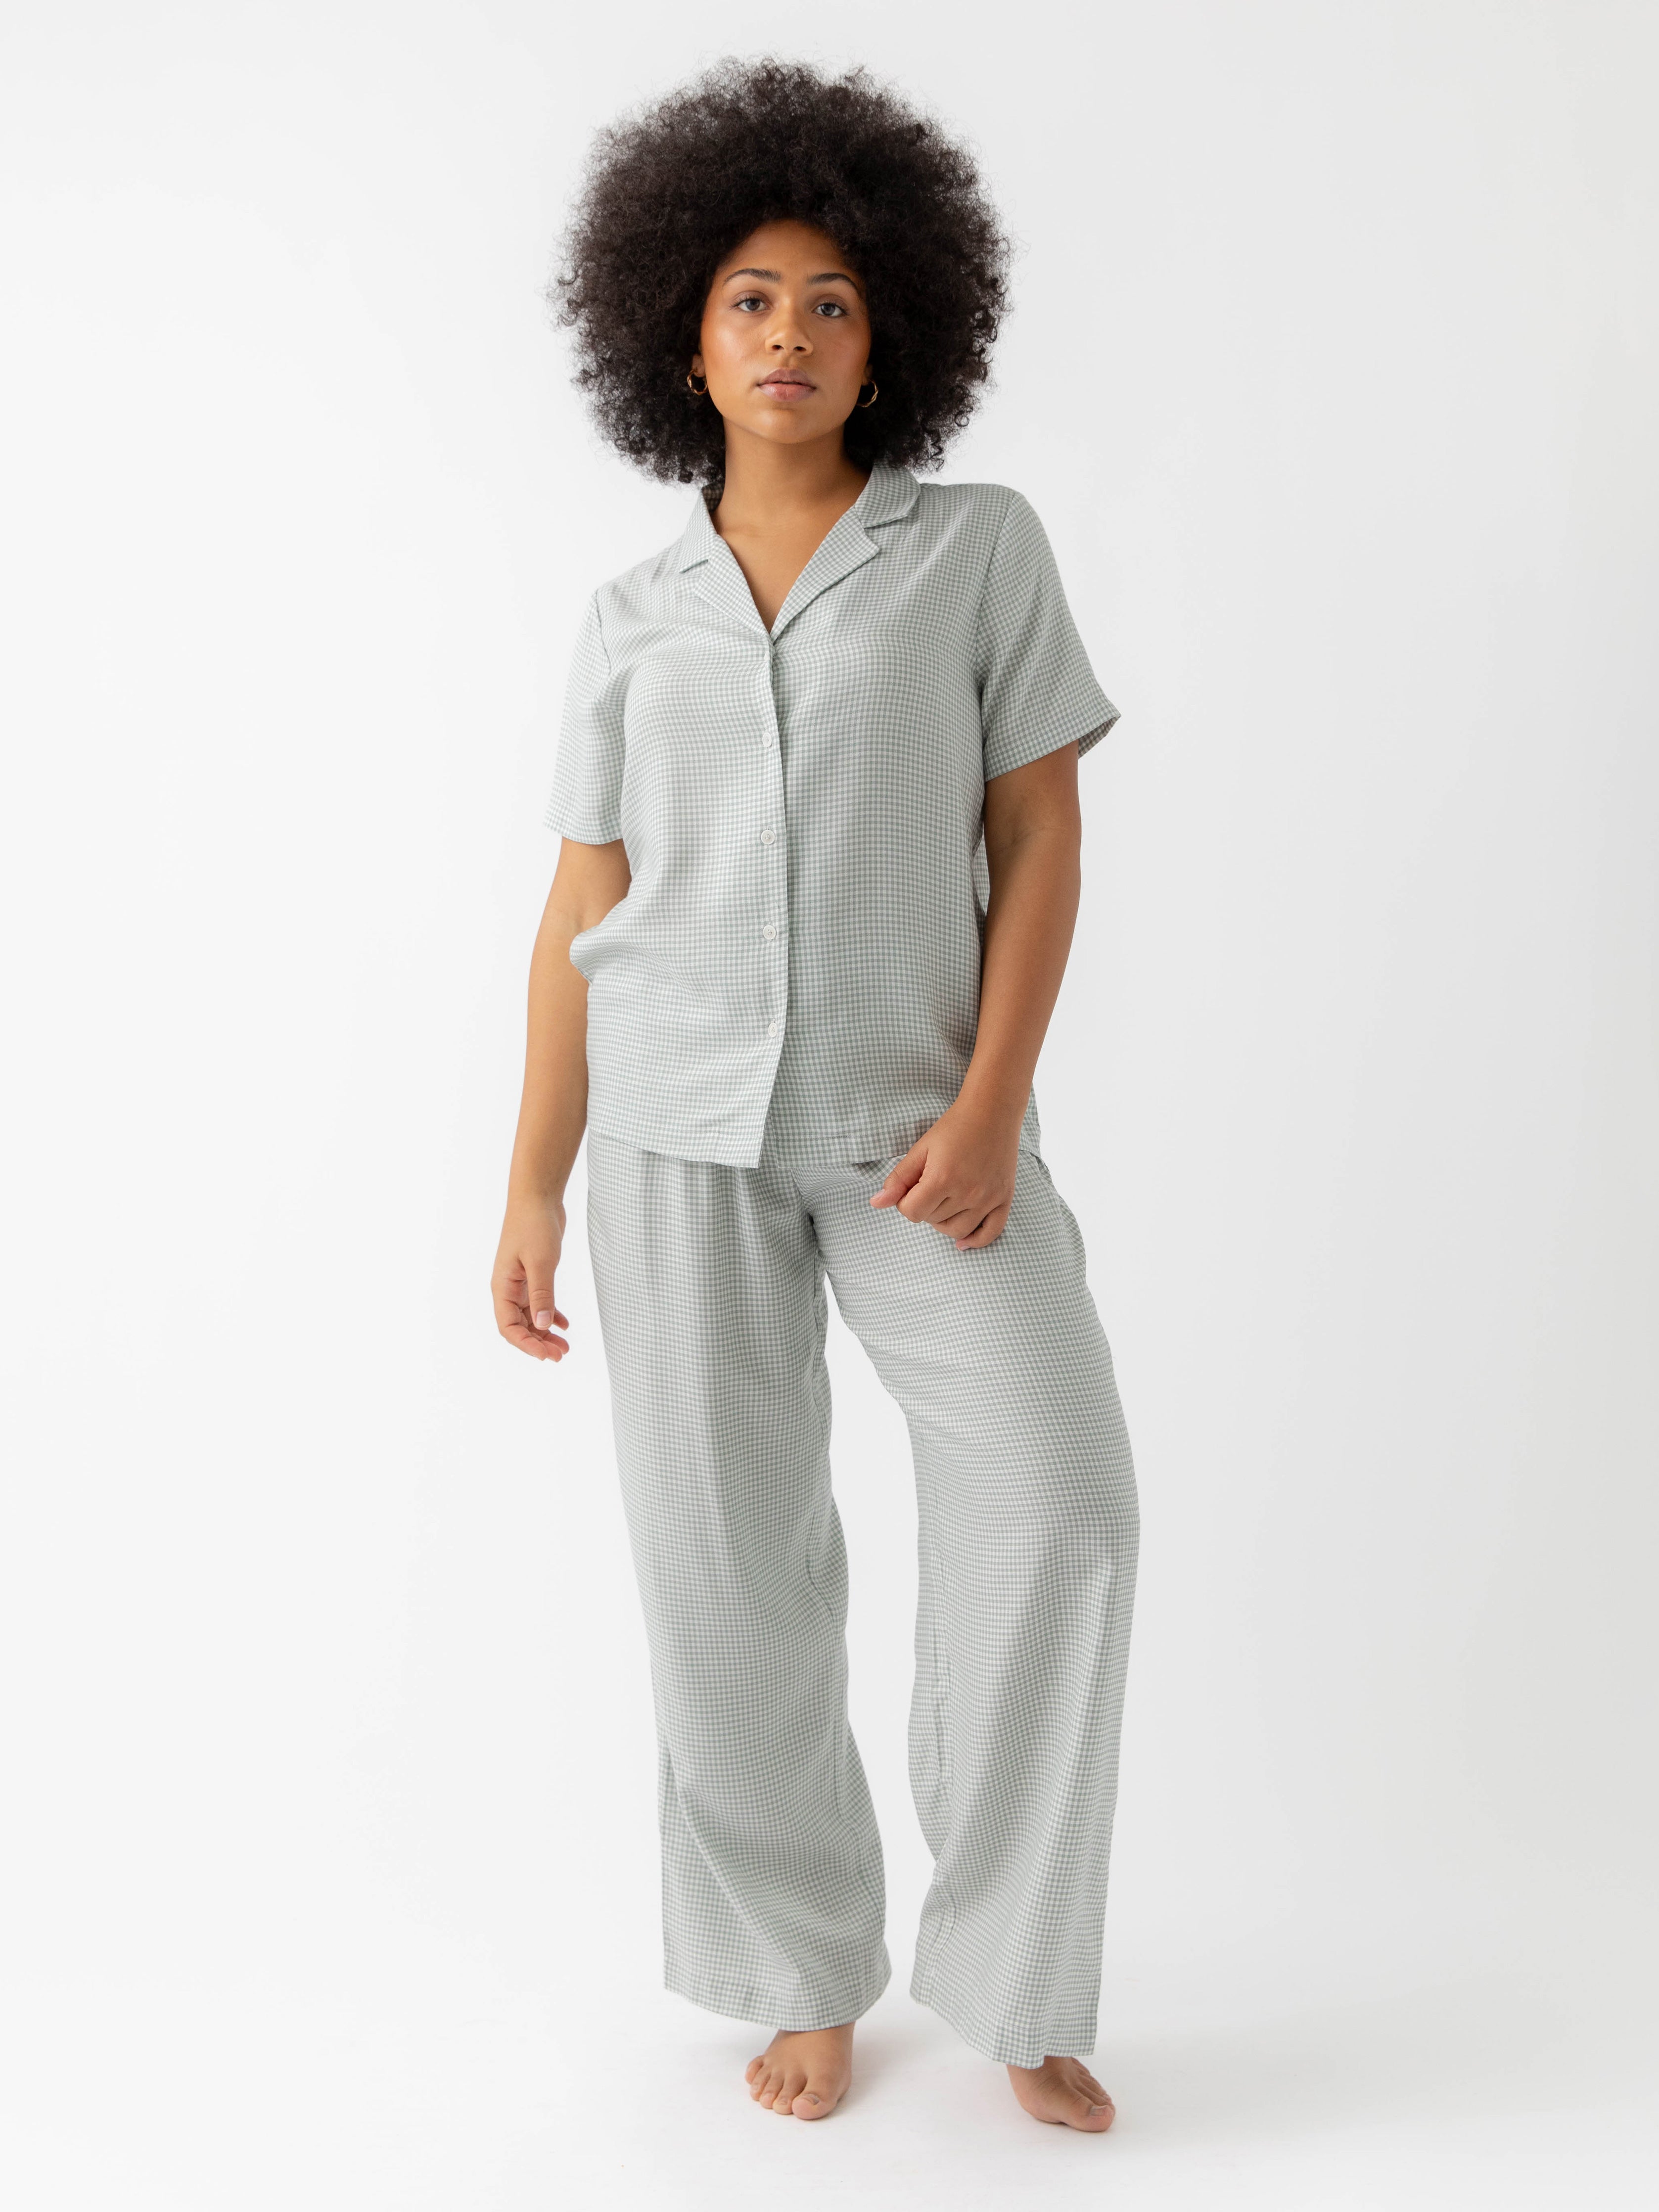 Woman in Haze Mini Gingham soft woven pajama set with white background |Color:Haze Mini Gingham